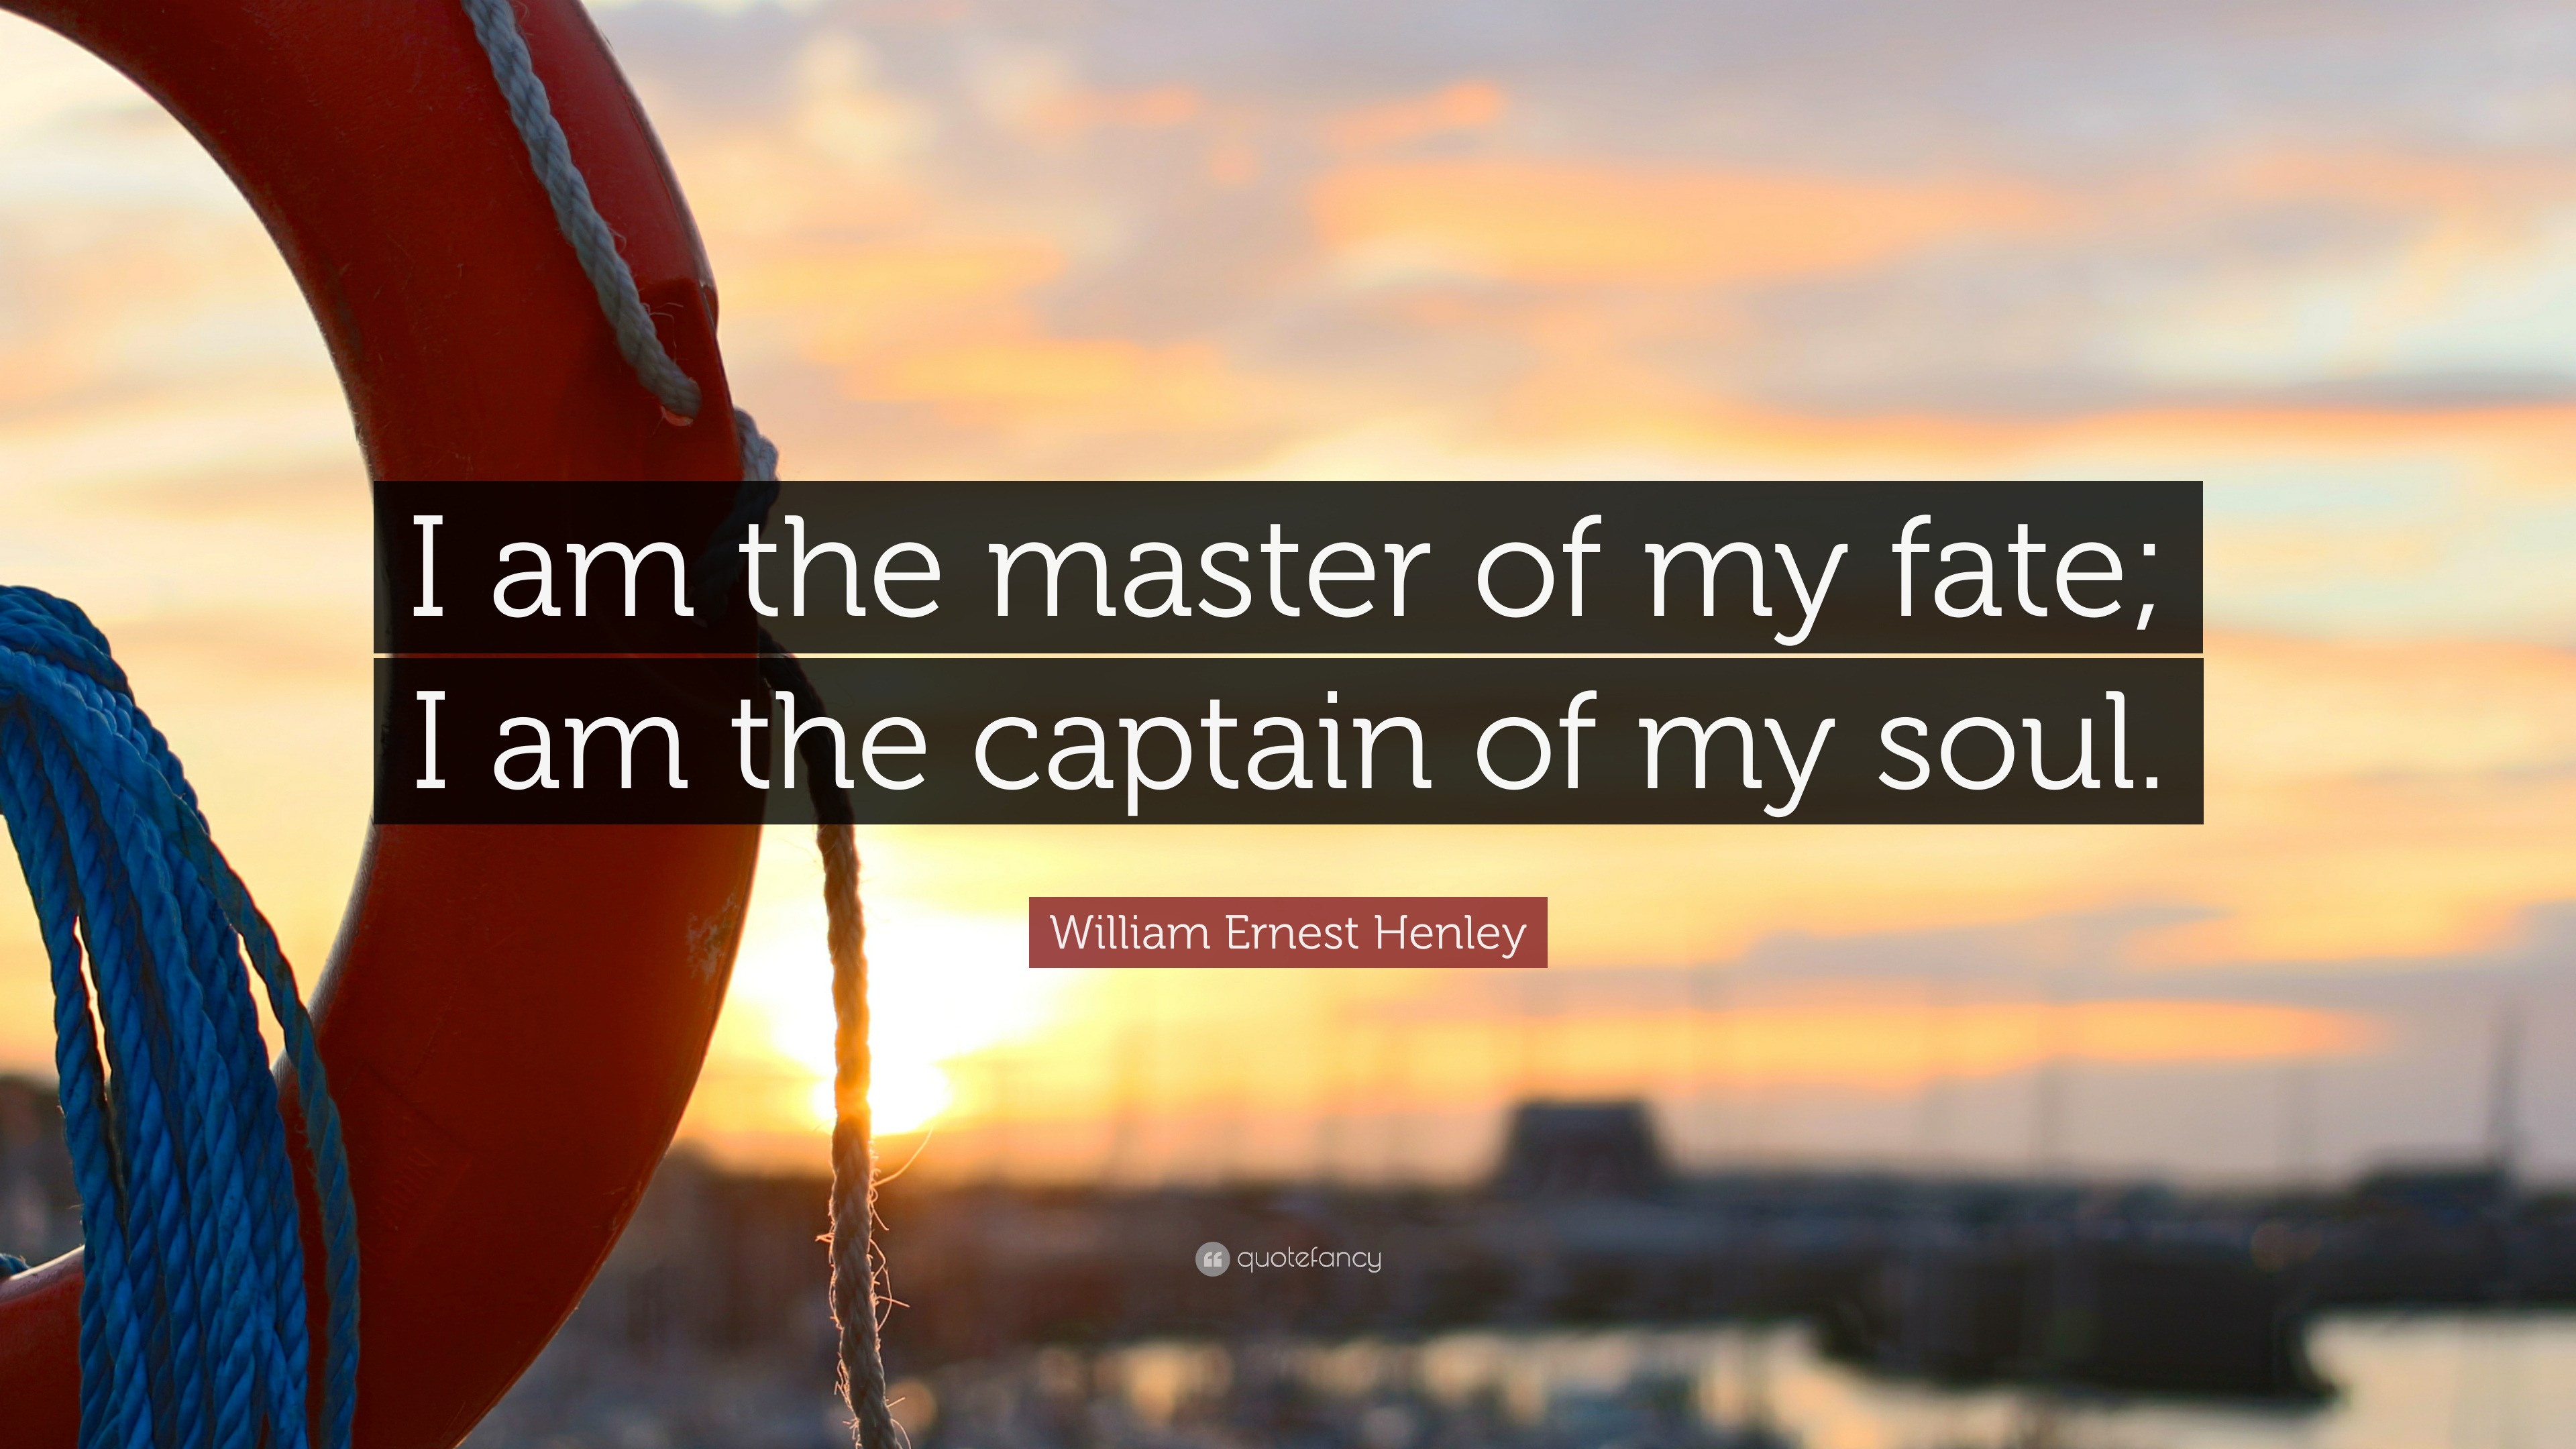 i am the captain of my soul